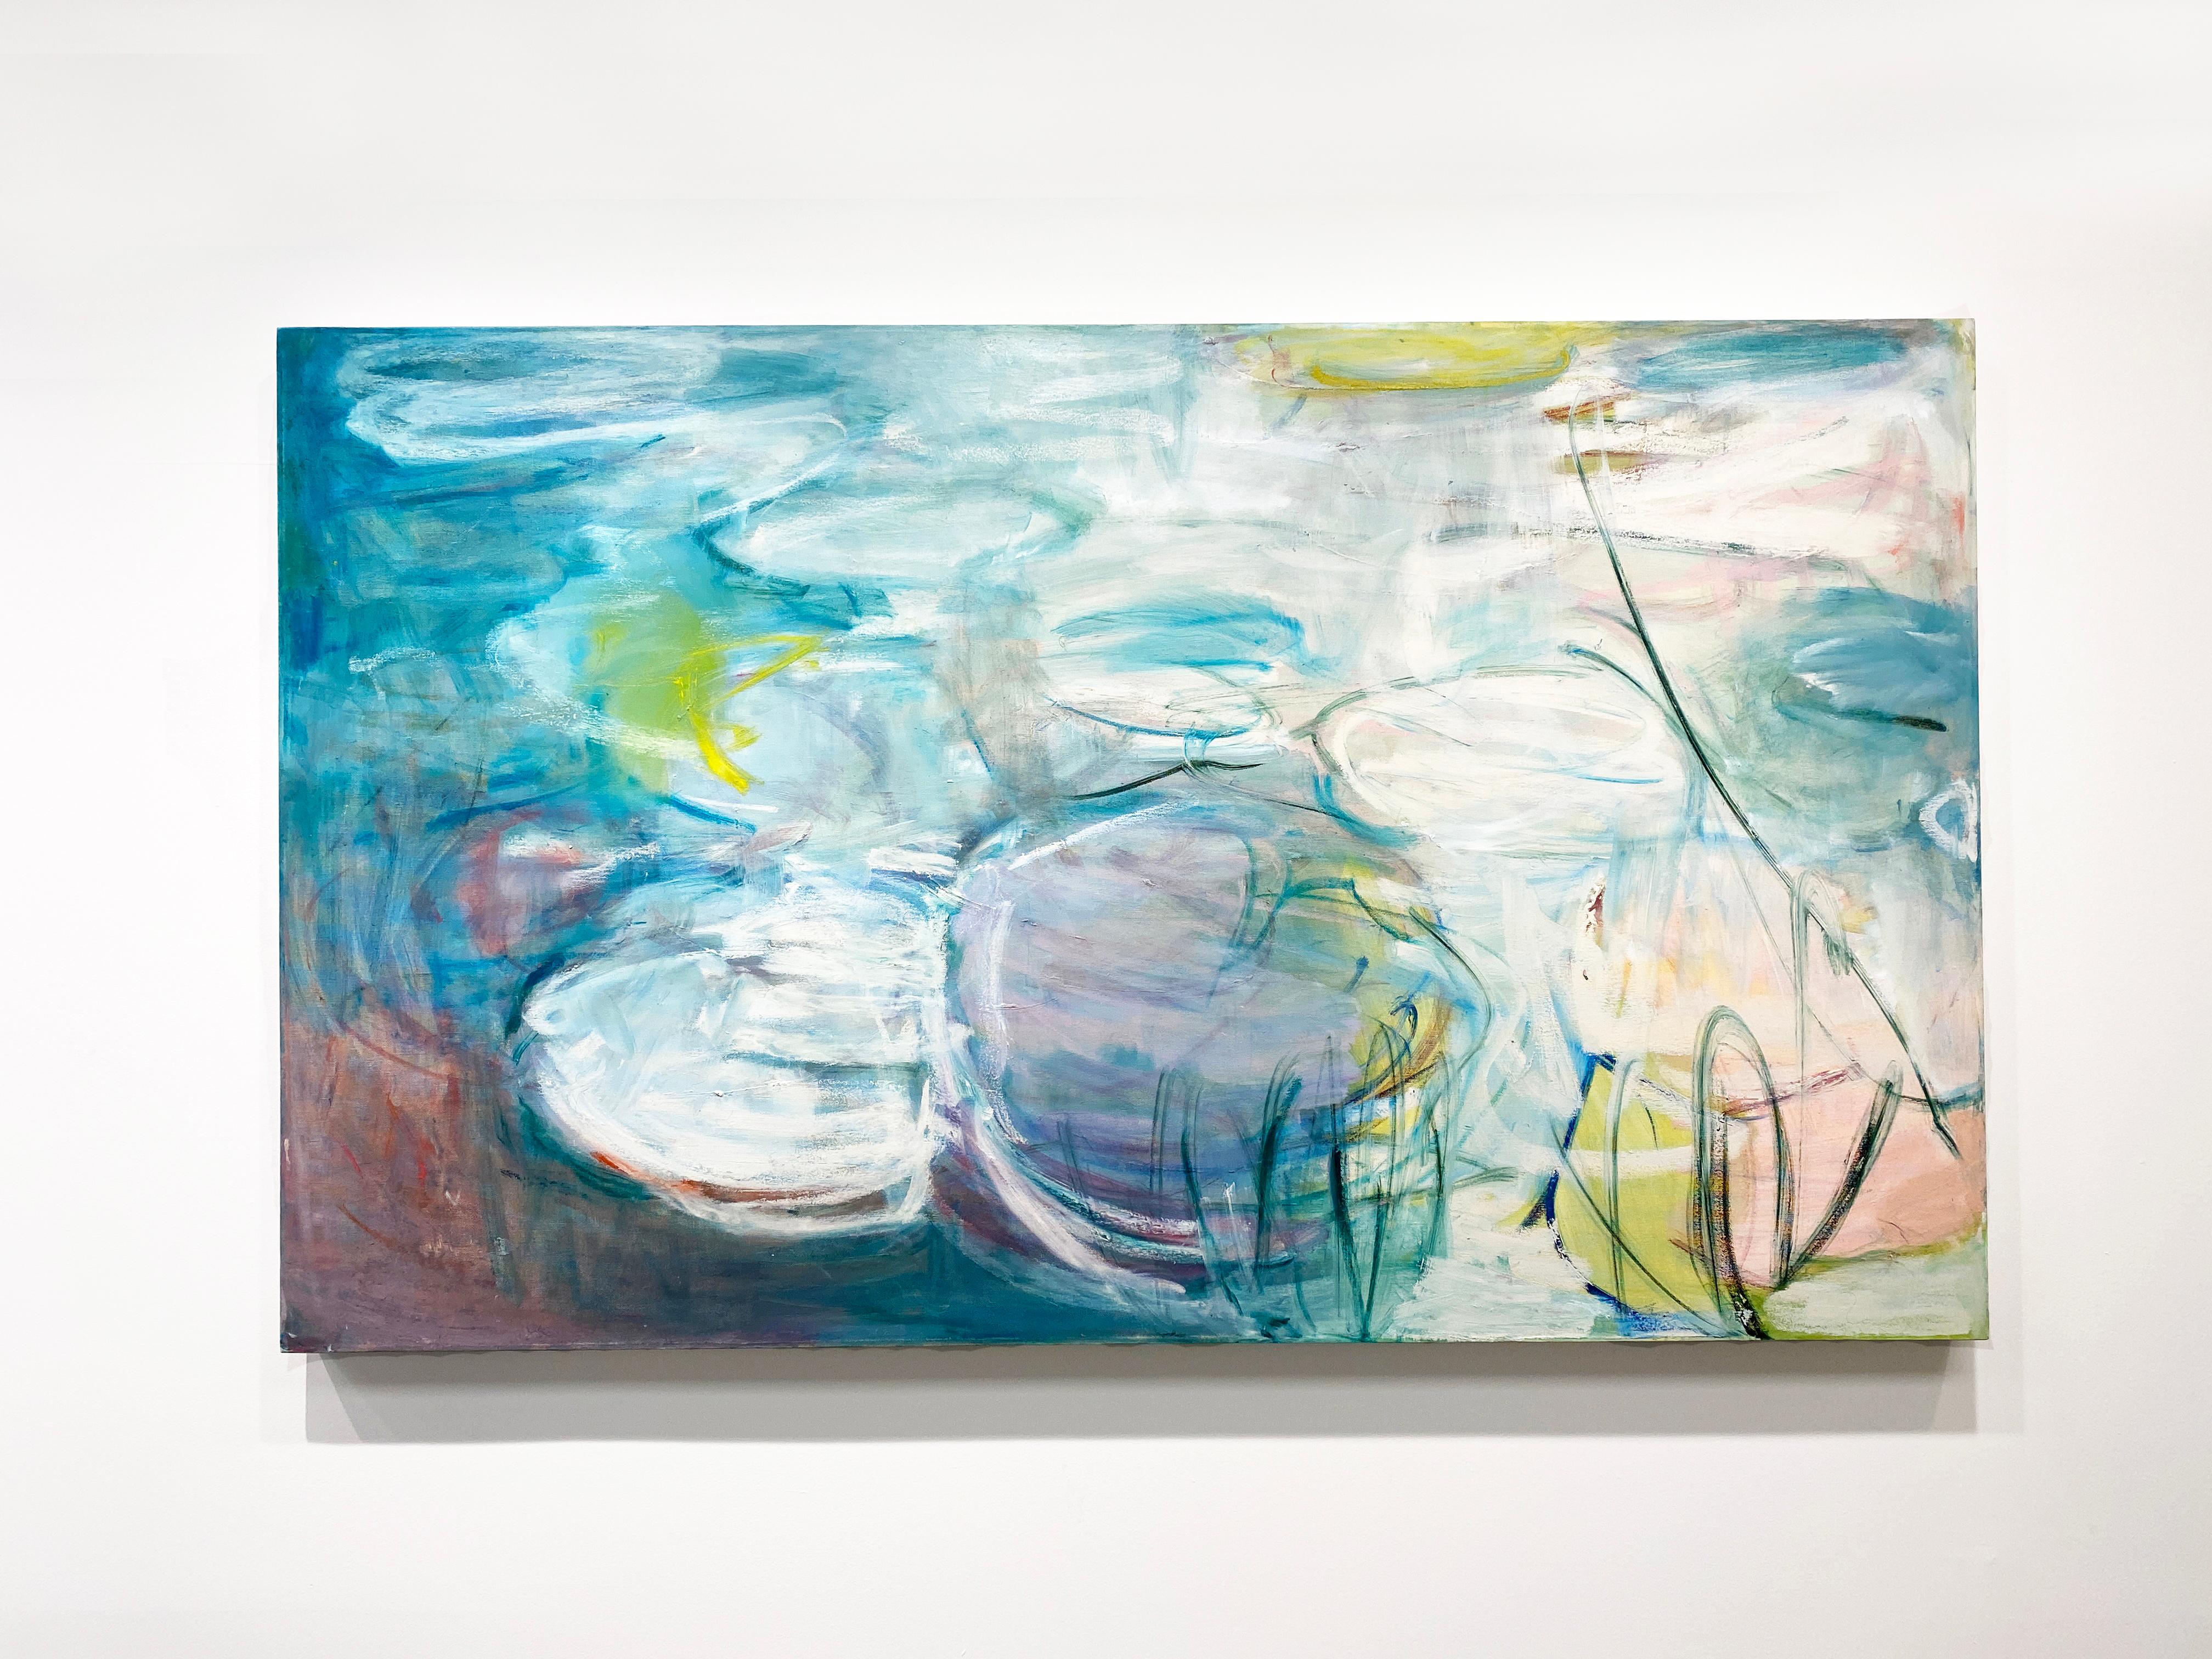 Available at Madelyn Jordon Fine Art. 'Lilies In Light' by New York City based, French artist Sandrine Kern. 2022. Oil and cold wax on canvas, 36 x 60 in. This abstracted landscape painting features a pond and a water lily scene in colors of blue,